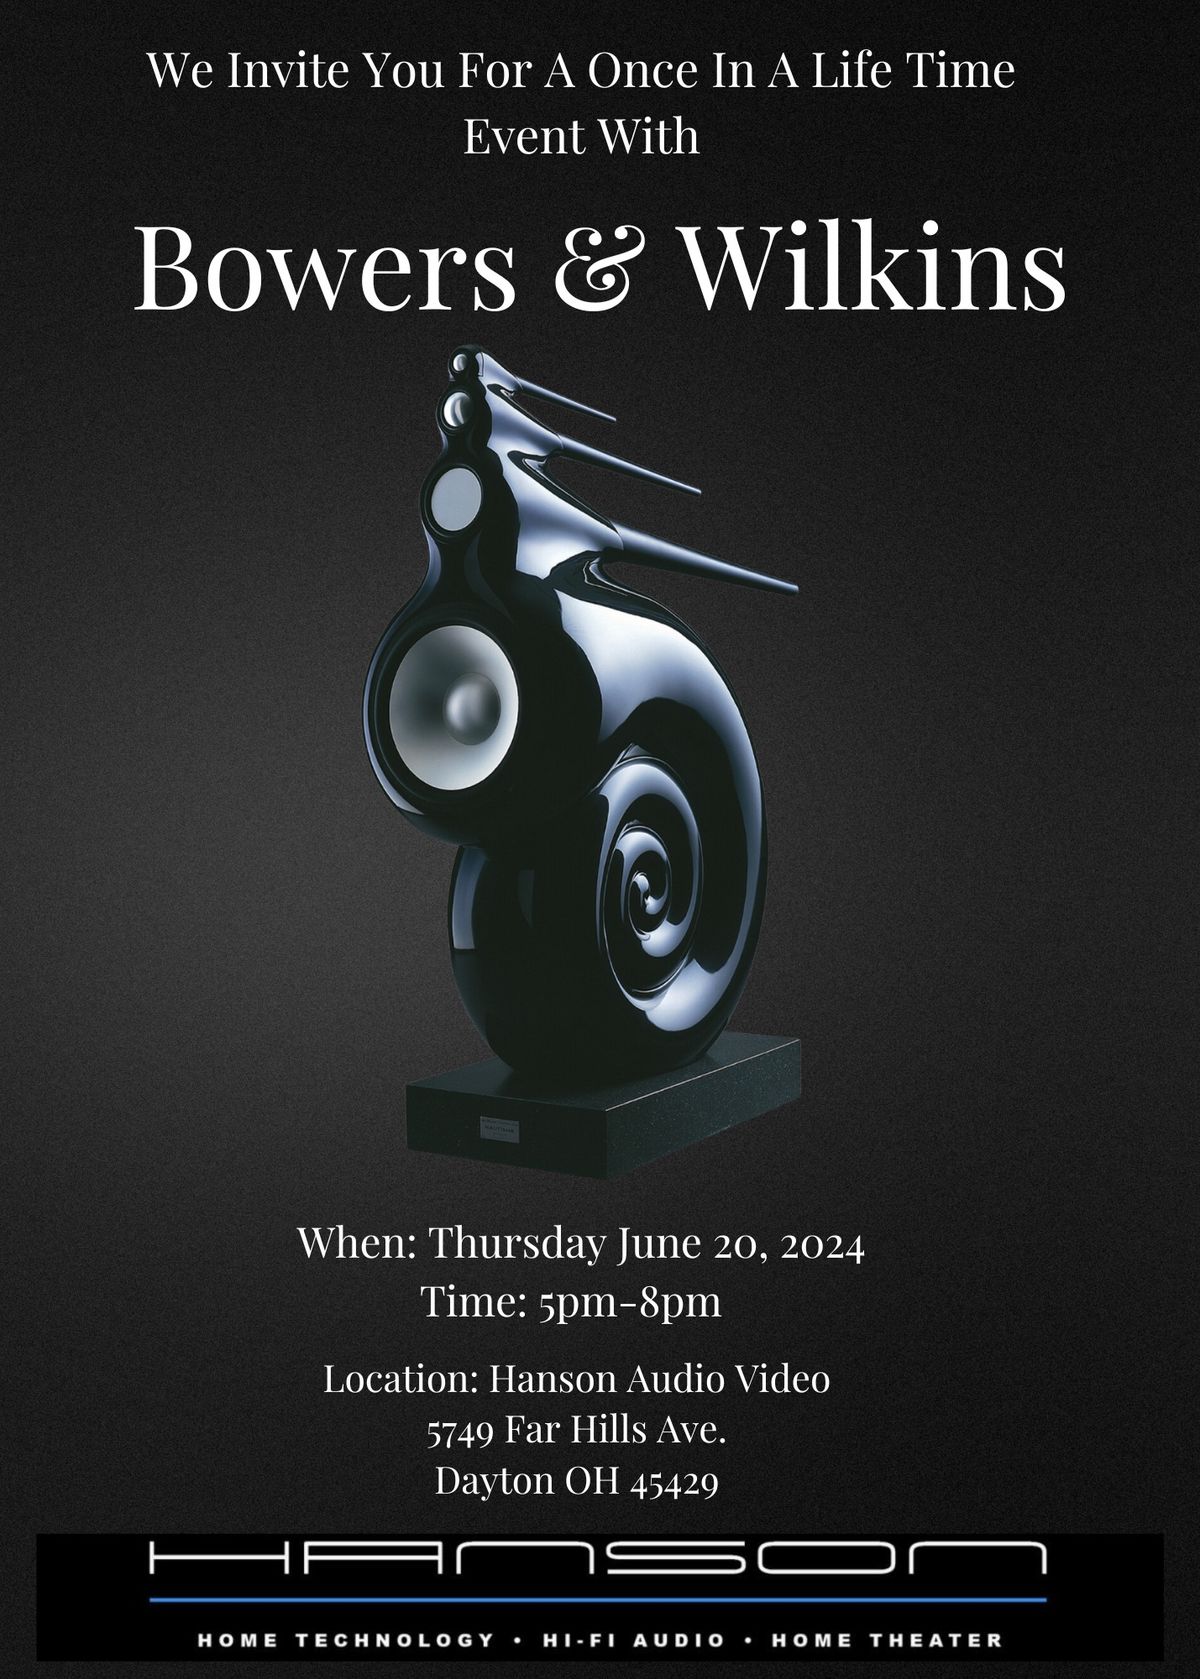 Bowers & Wilkins Event